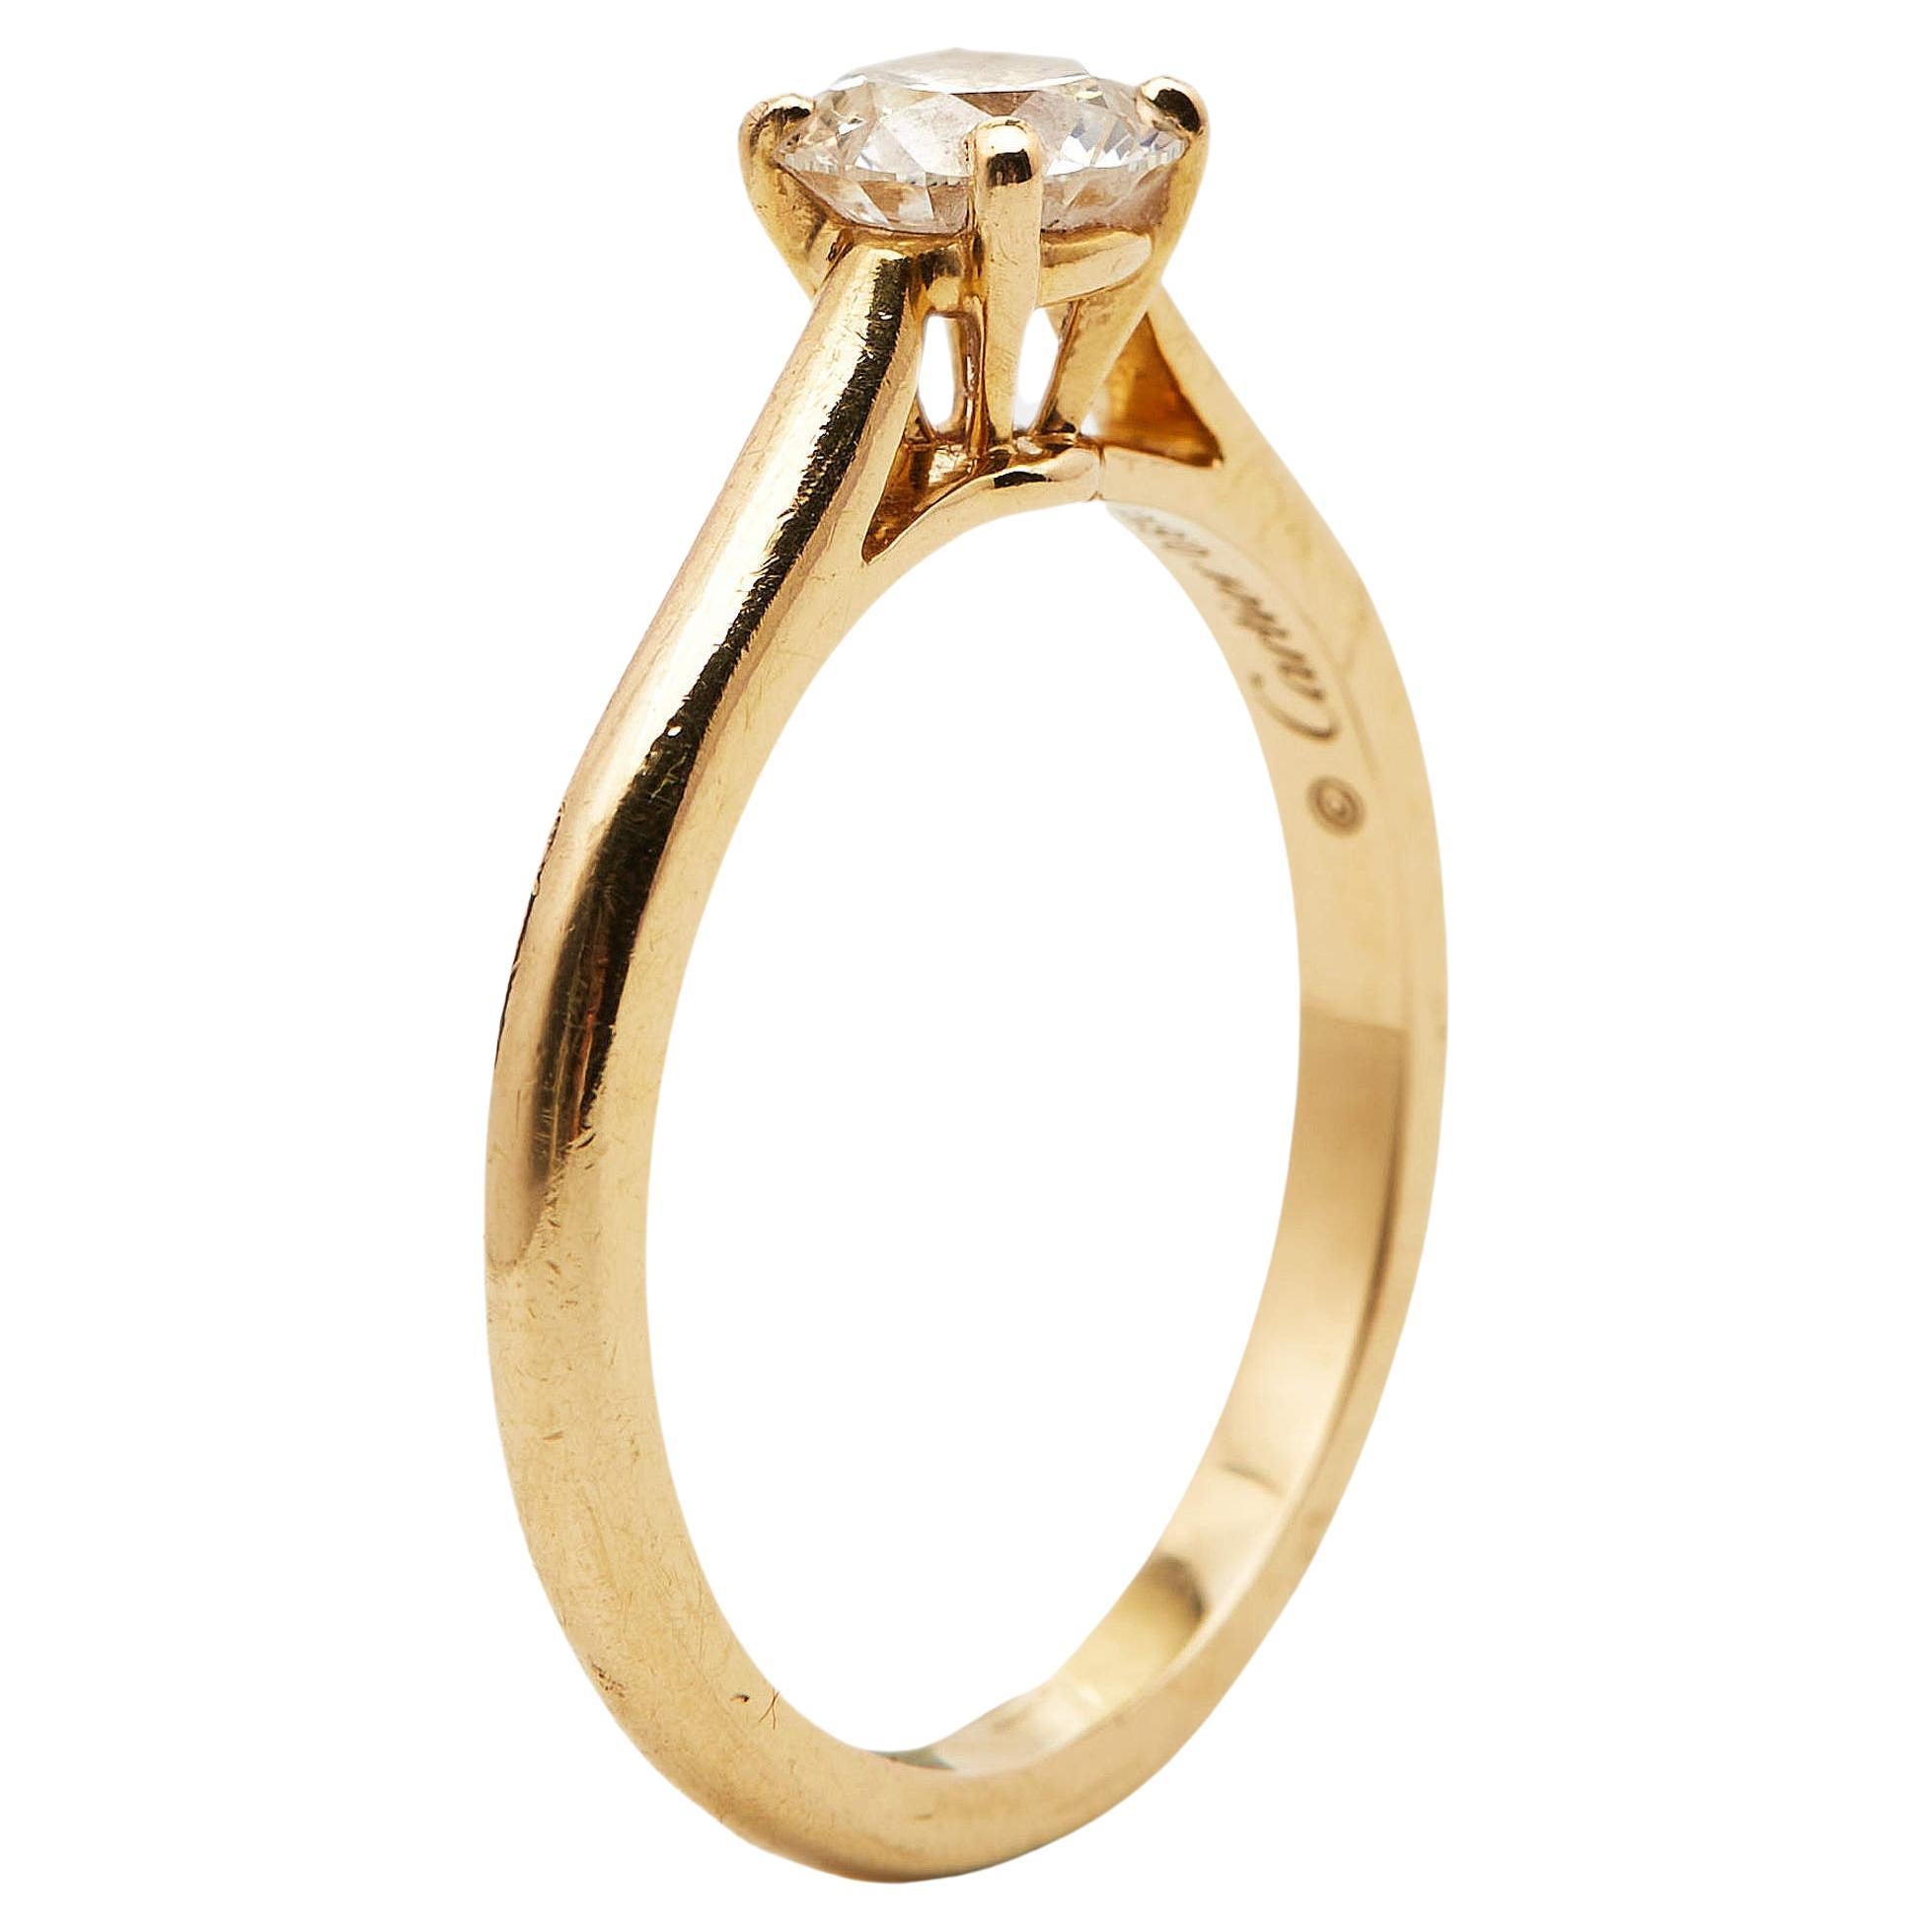 Cartier 1895 Diamond 18k Yellow Gold Solitare Ring Size 51 For Sale